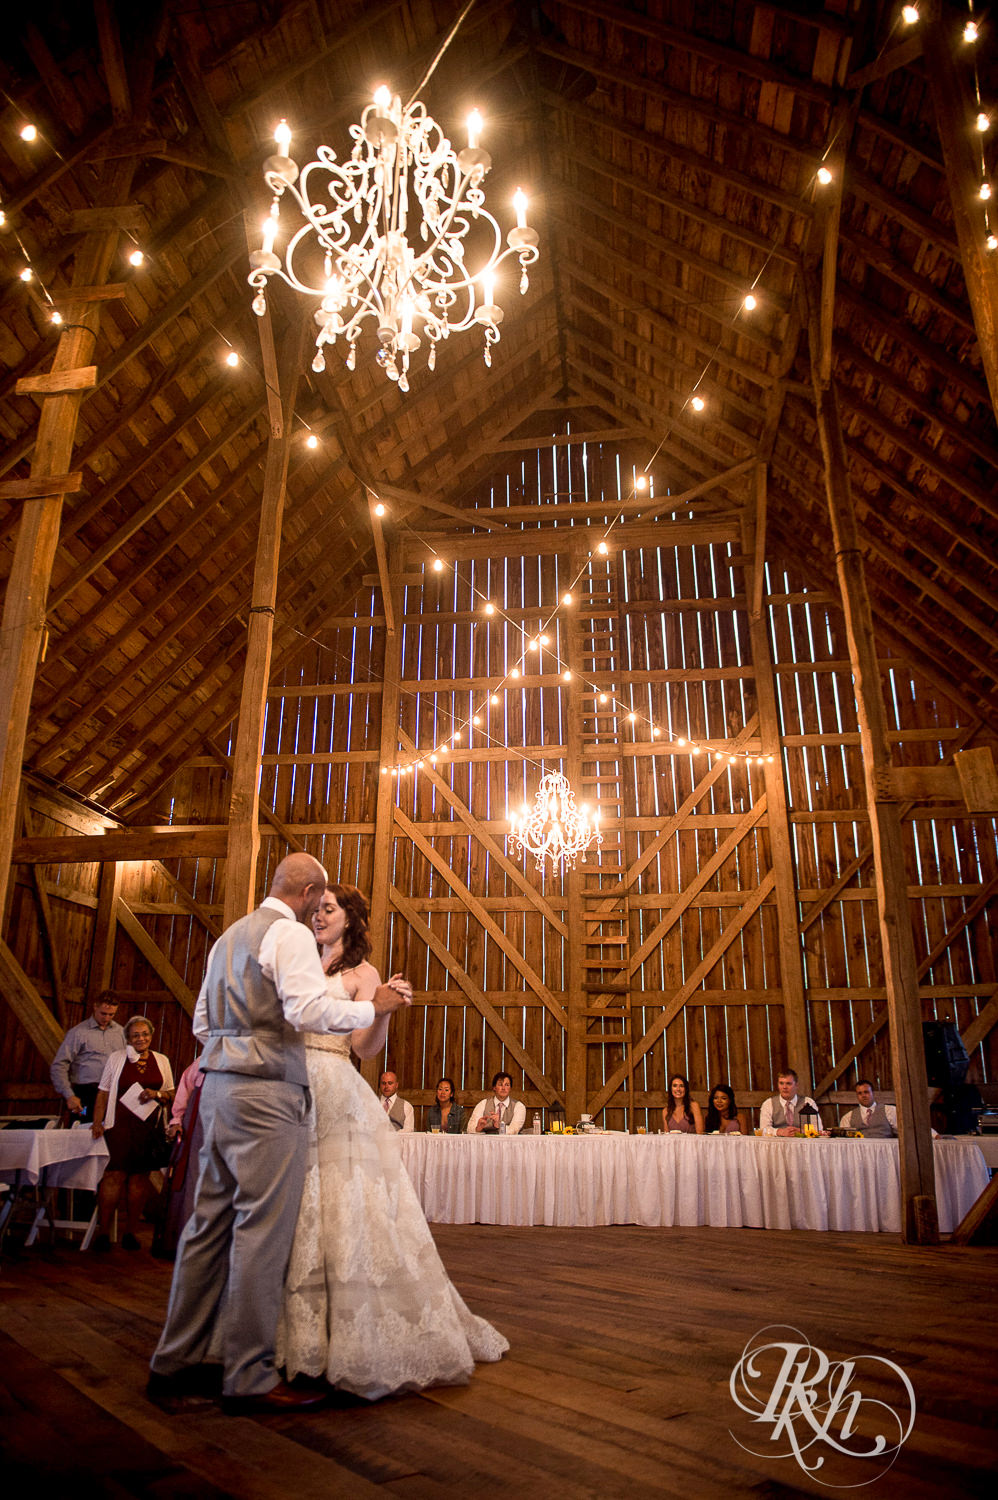 Bride and Asian groom dance under a chandelier during wedding reception at Birch Hill Barn in Glenwood City, Wisconsin.